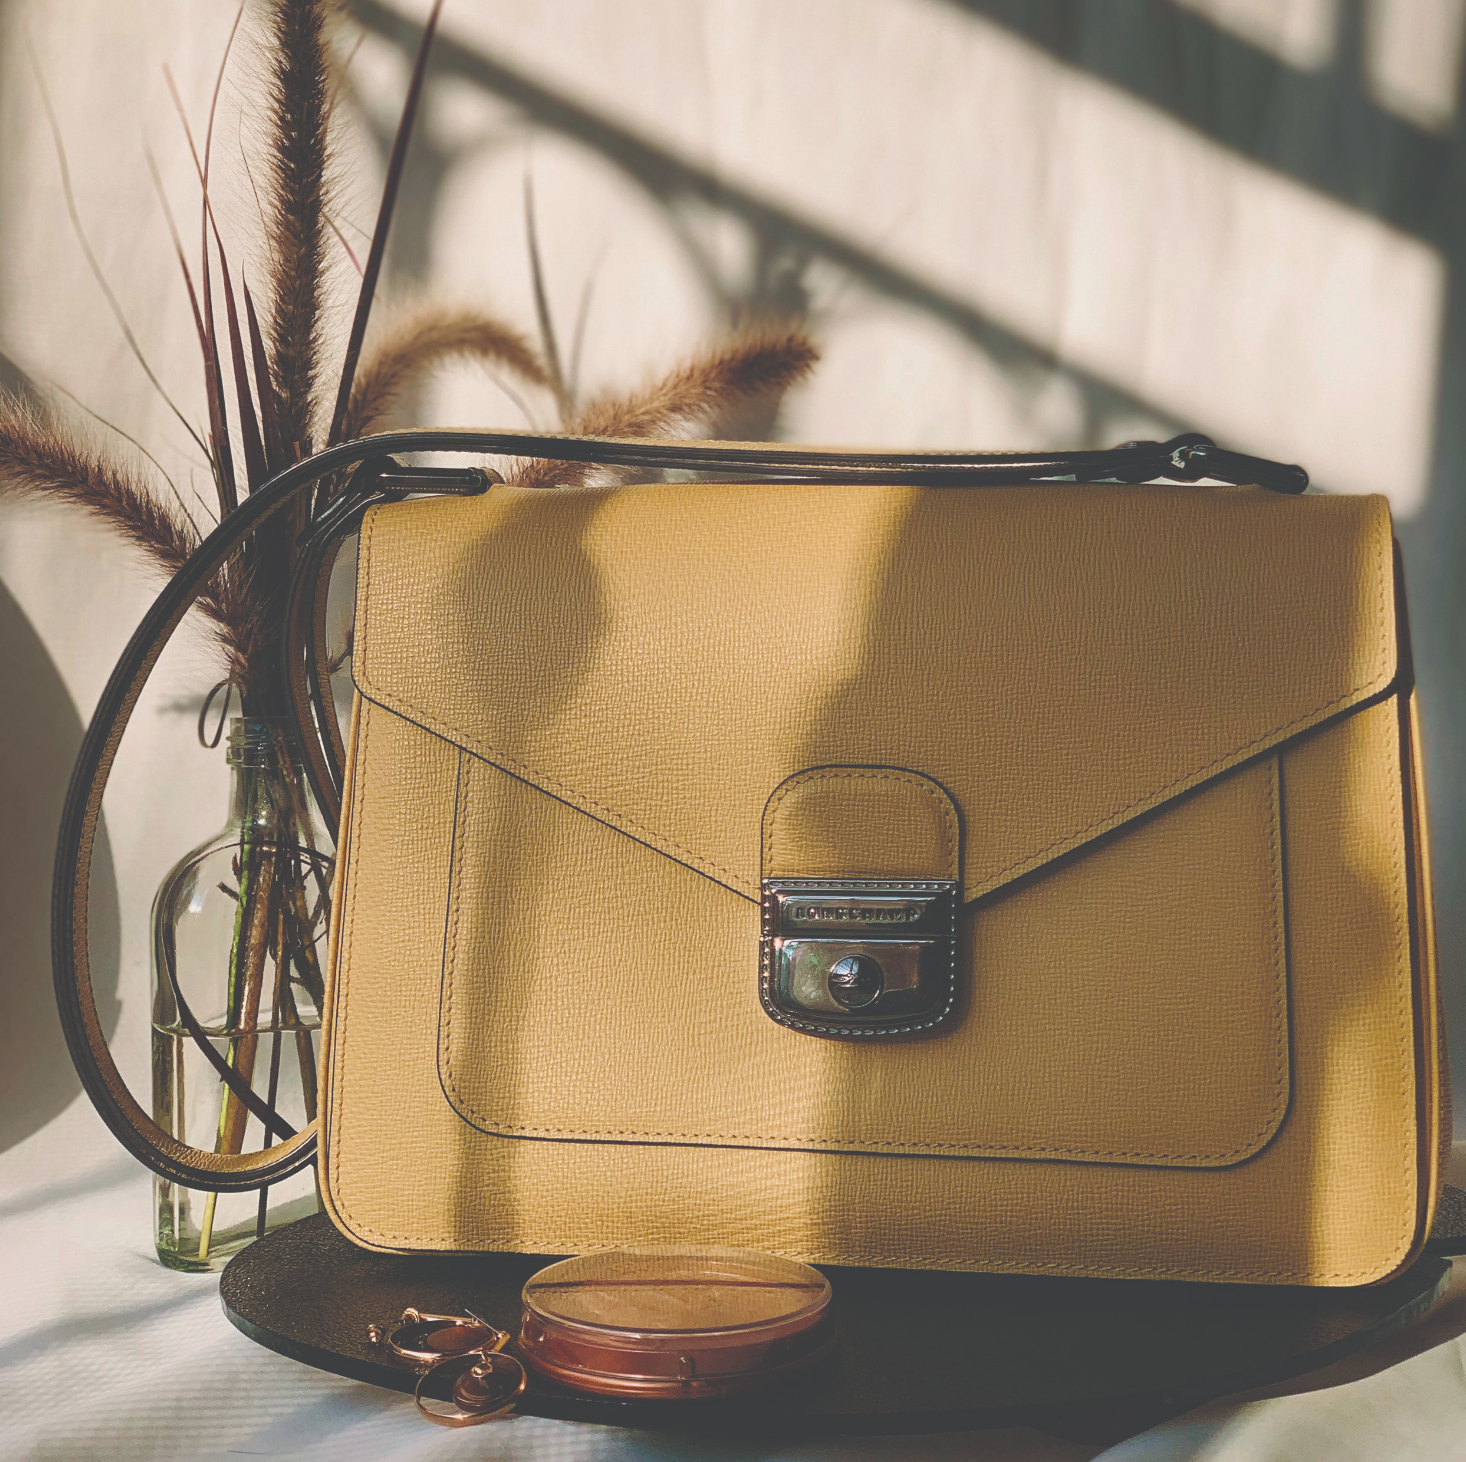 Sustainable Luxury  How to Buy Pre-owned Designer Bags